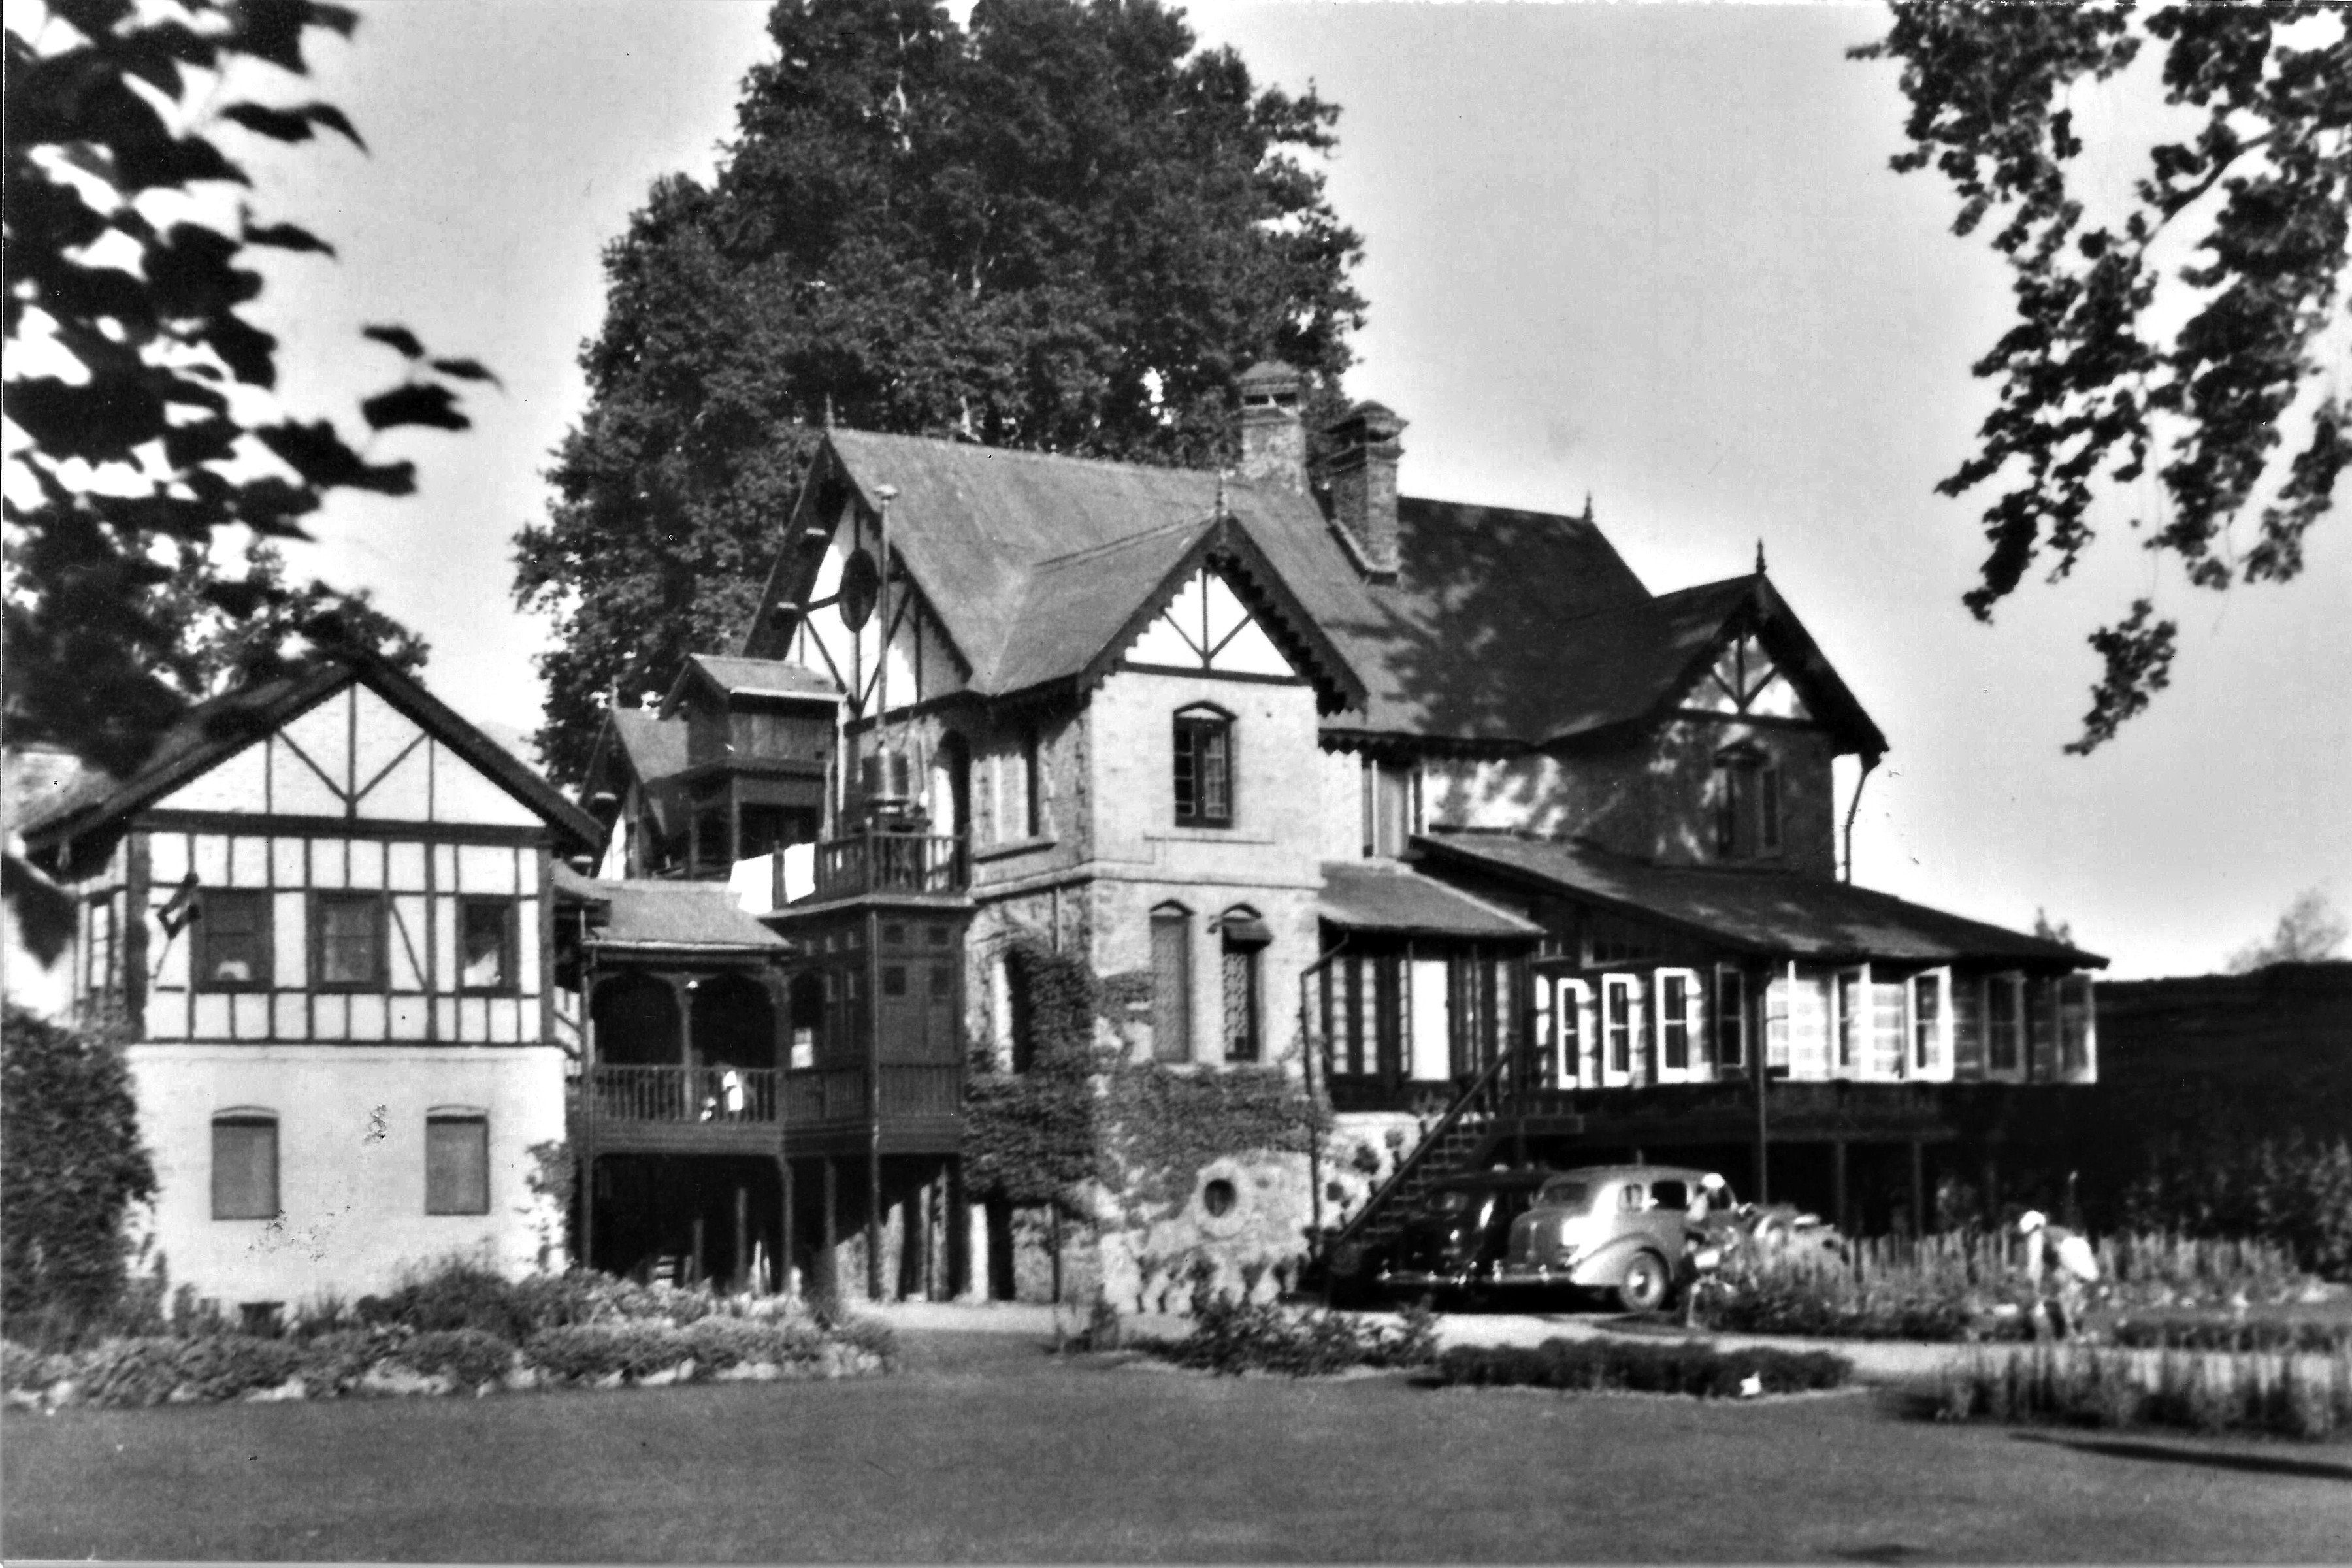 Sir Samad’s residence in Srinagar while he was home minister 1937-41.